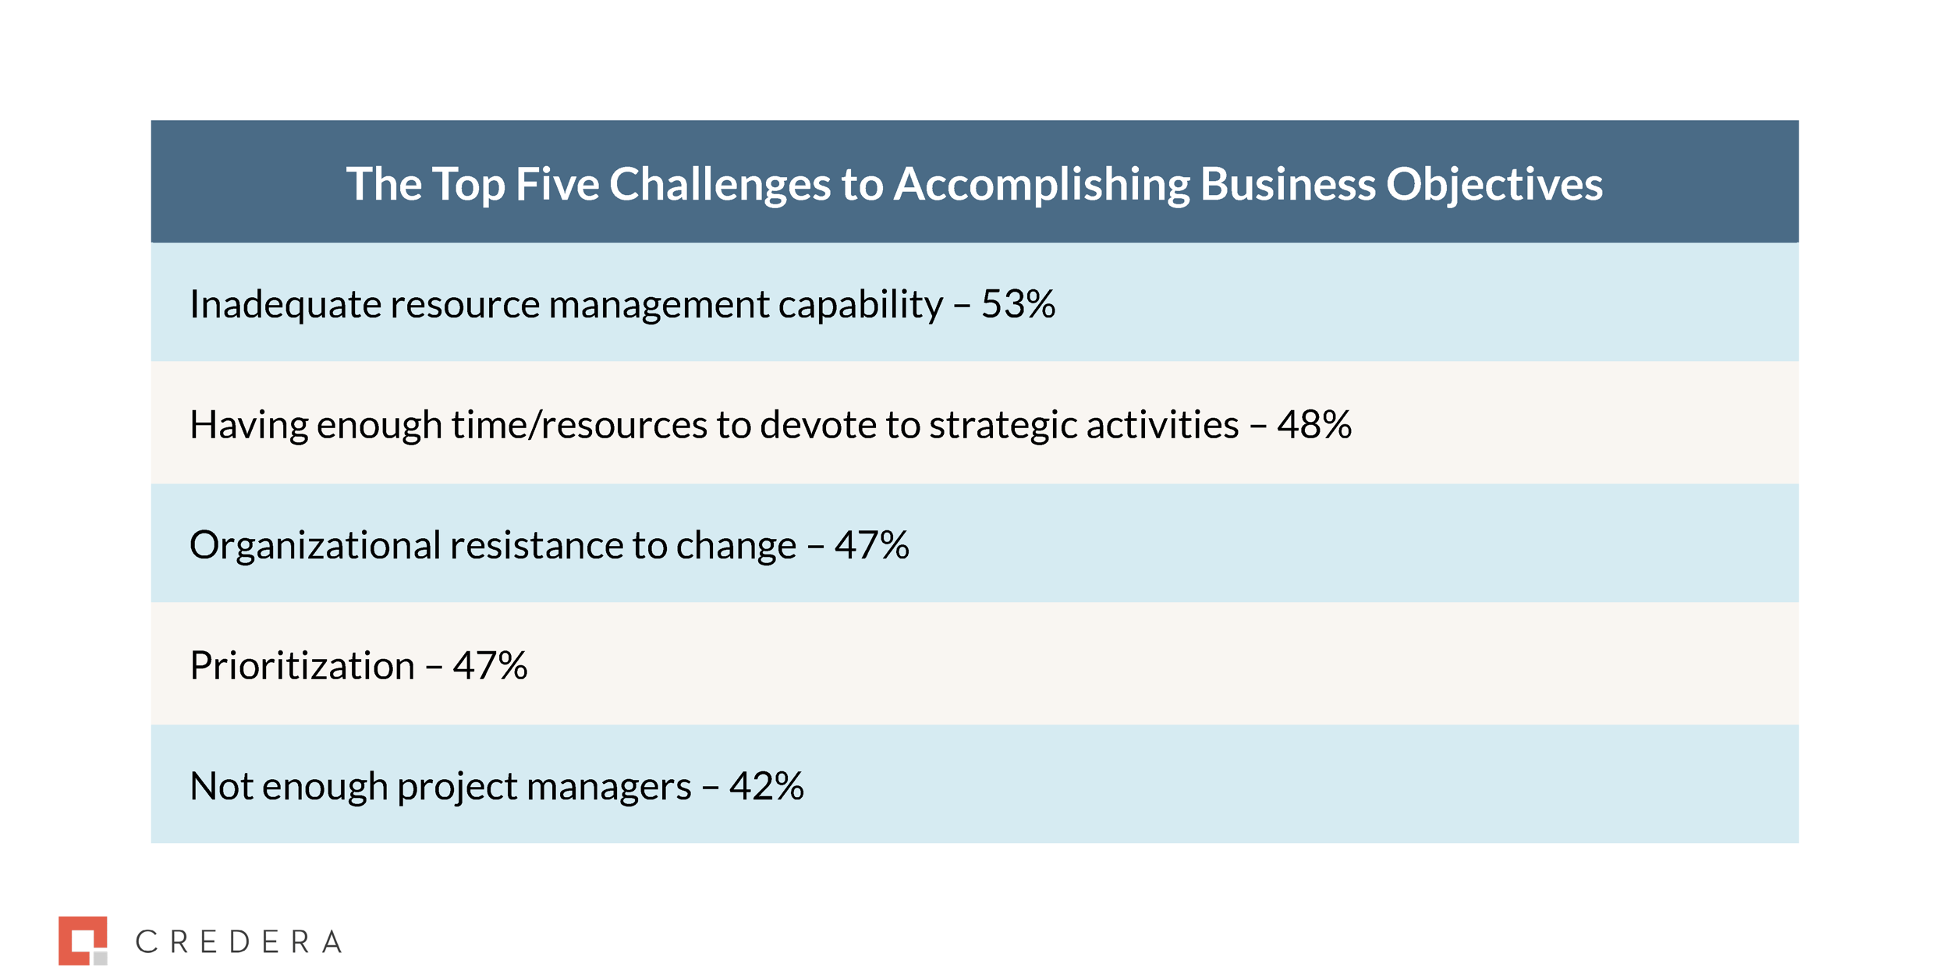 Top 5 challenges to Accomplishing Business Objectives